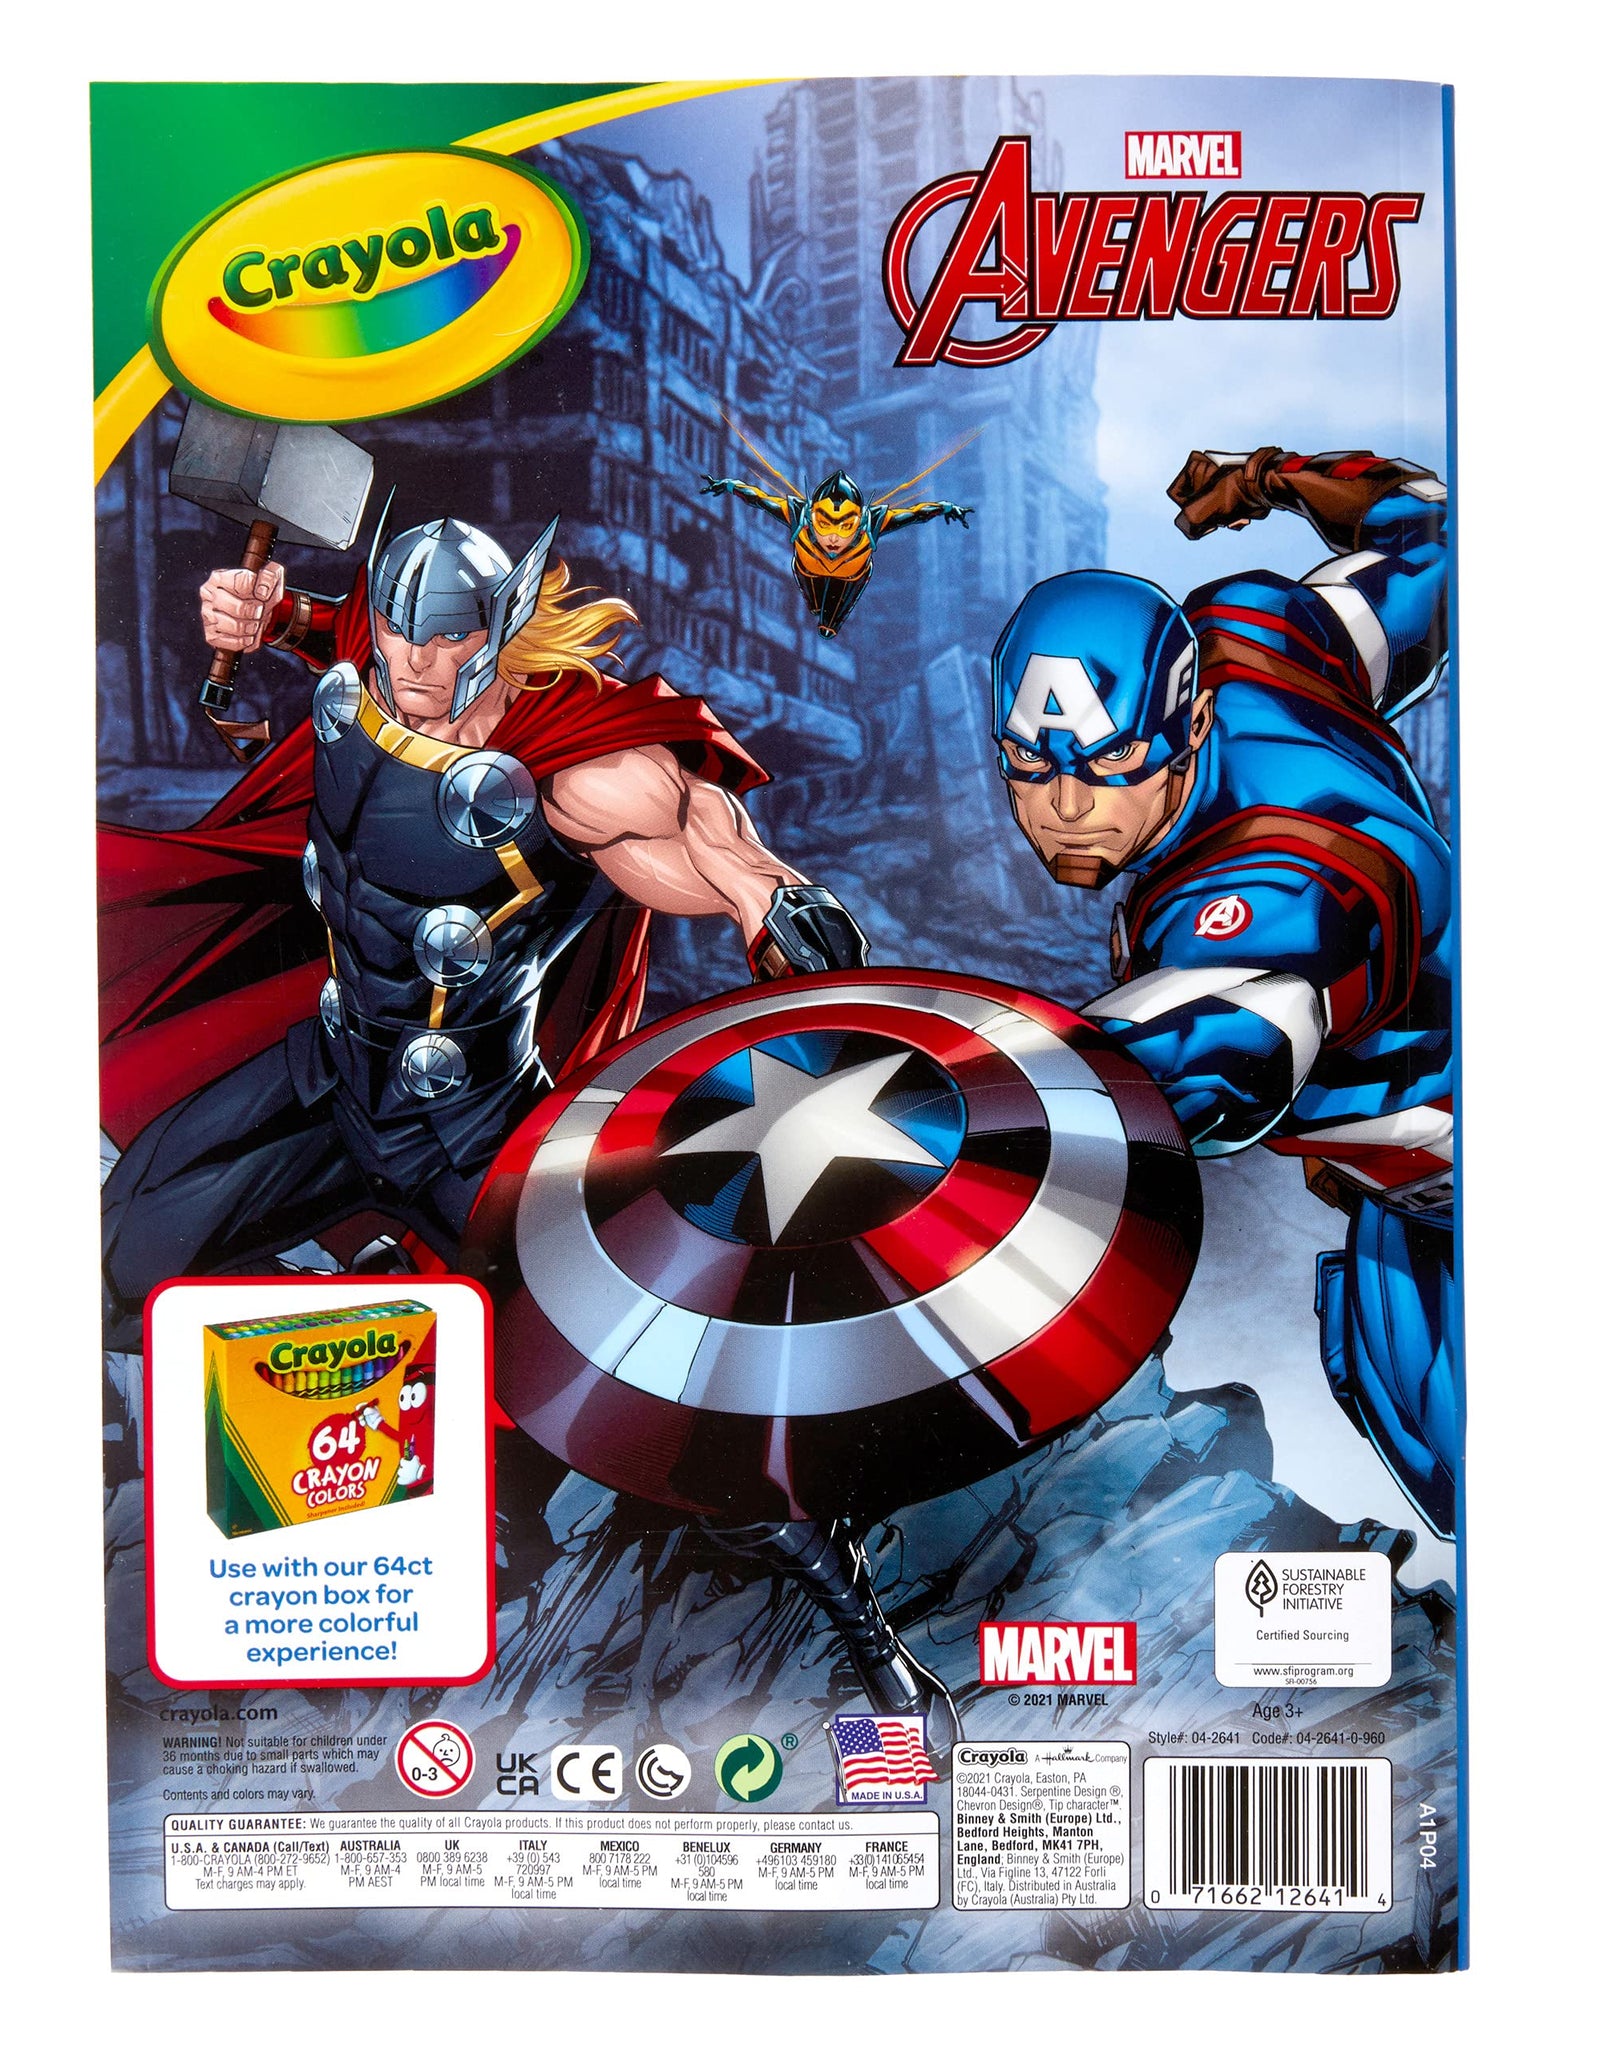 Crayola Avengers Coloring Book with Stickers, Gift for Kids, 96 Pages, Ages 3, 4, 5, 6